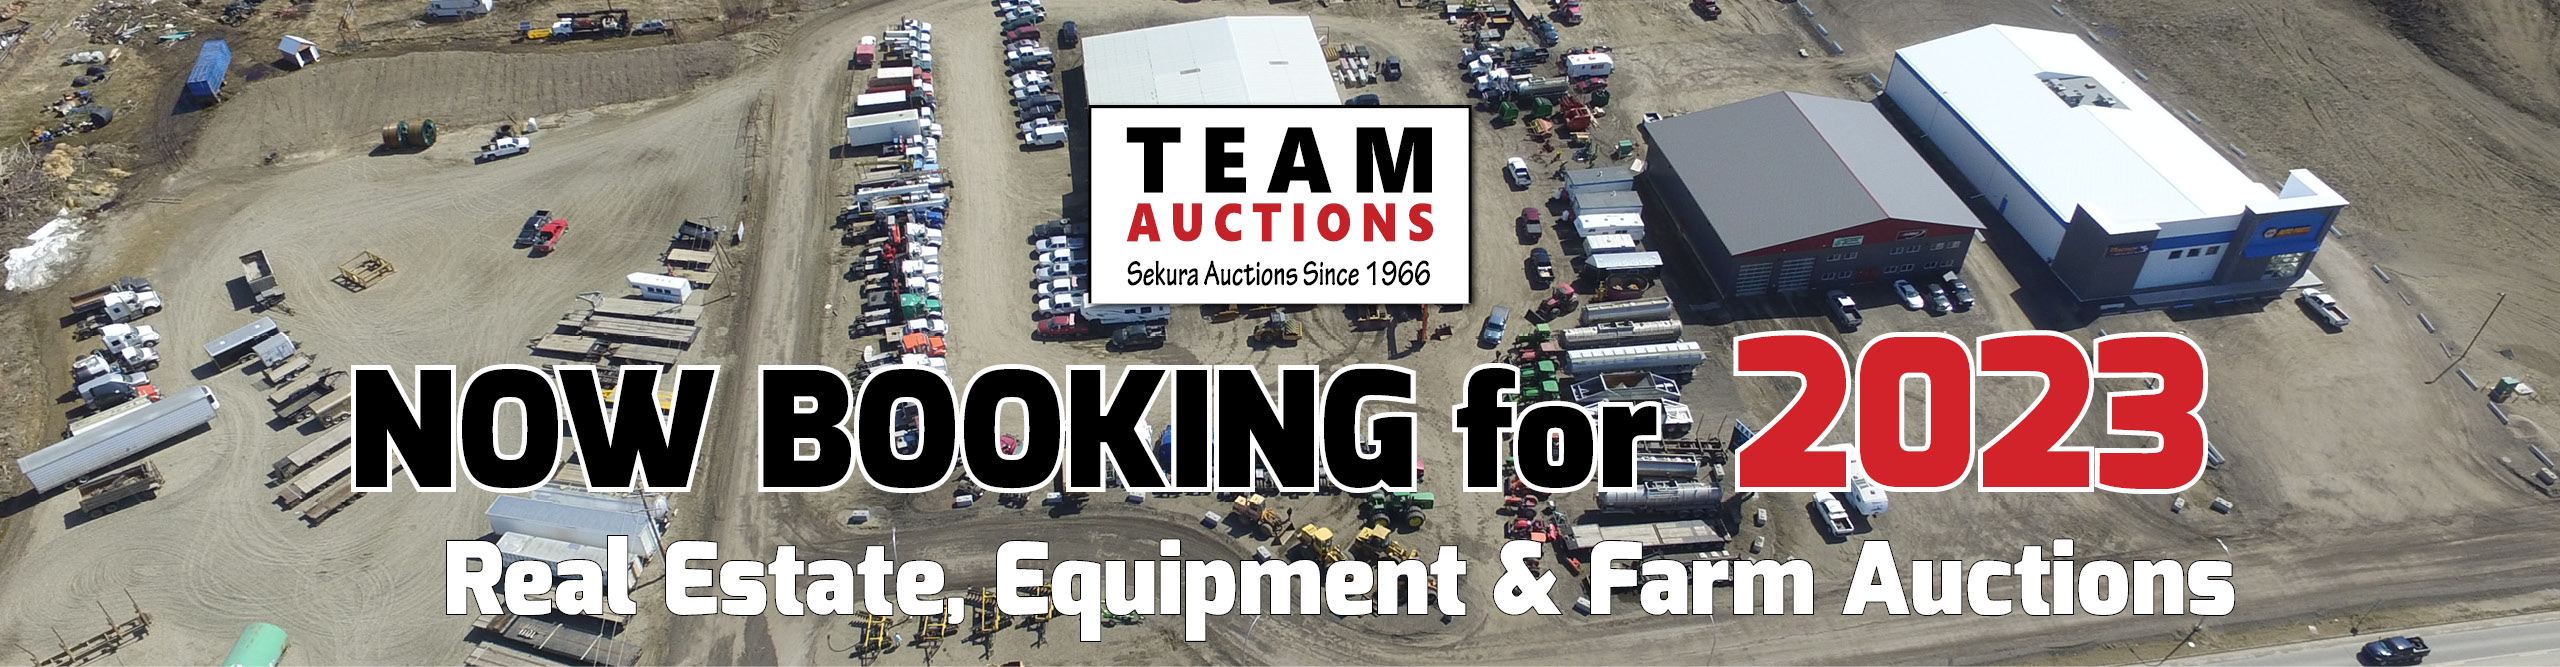 Team Auctions | Complete Real Estate, Equipment & Consignment ...